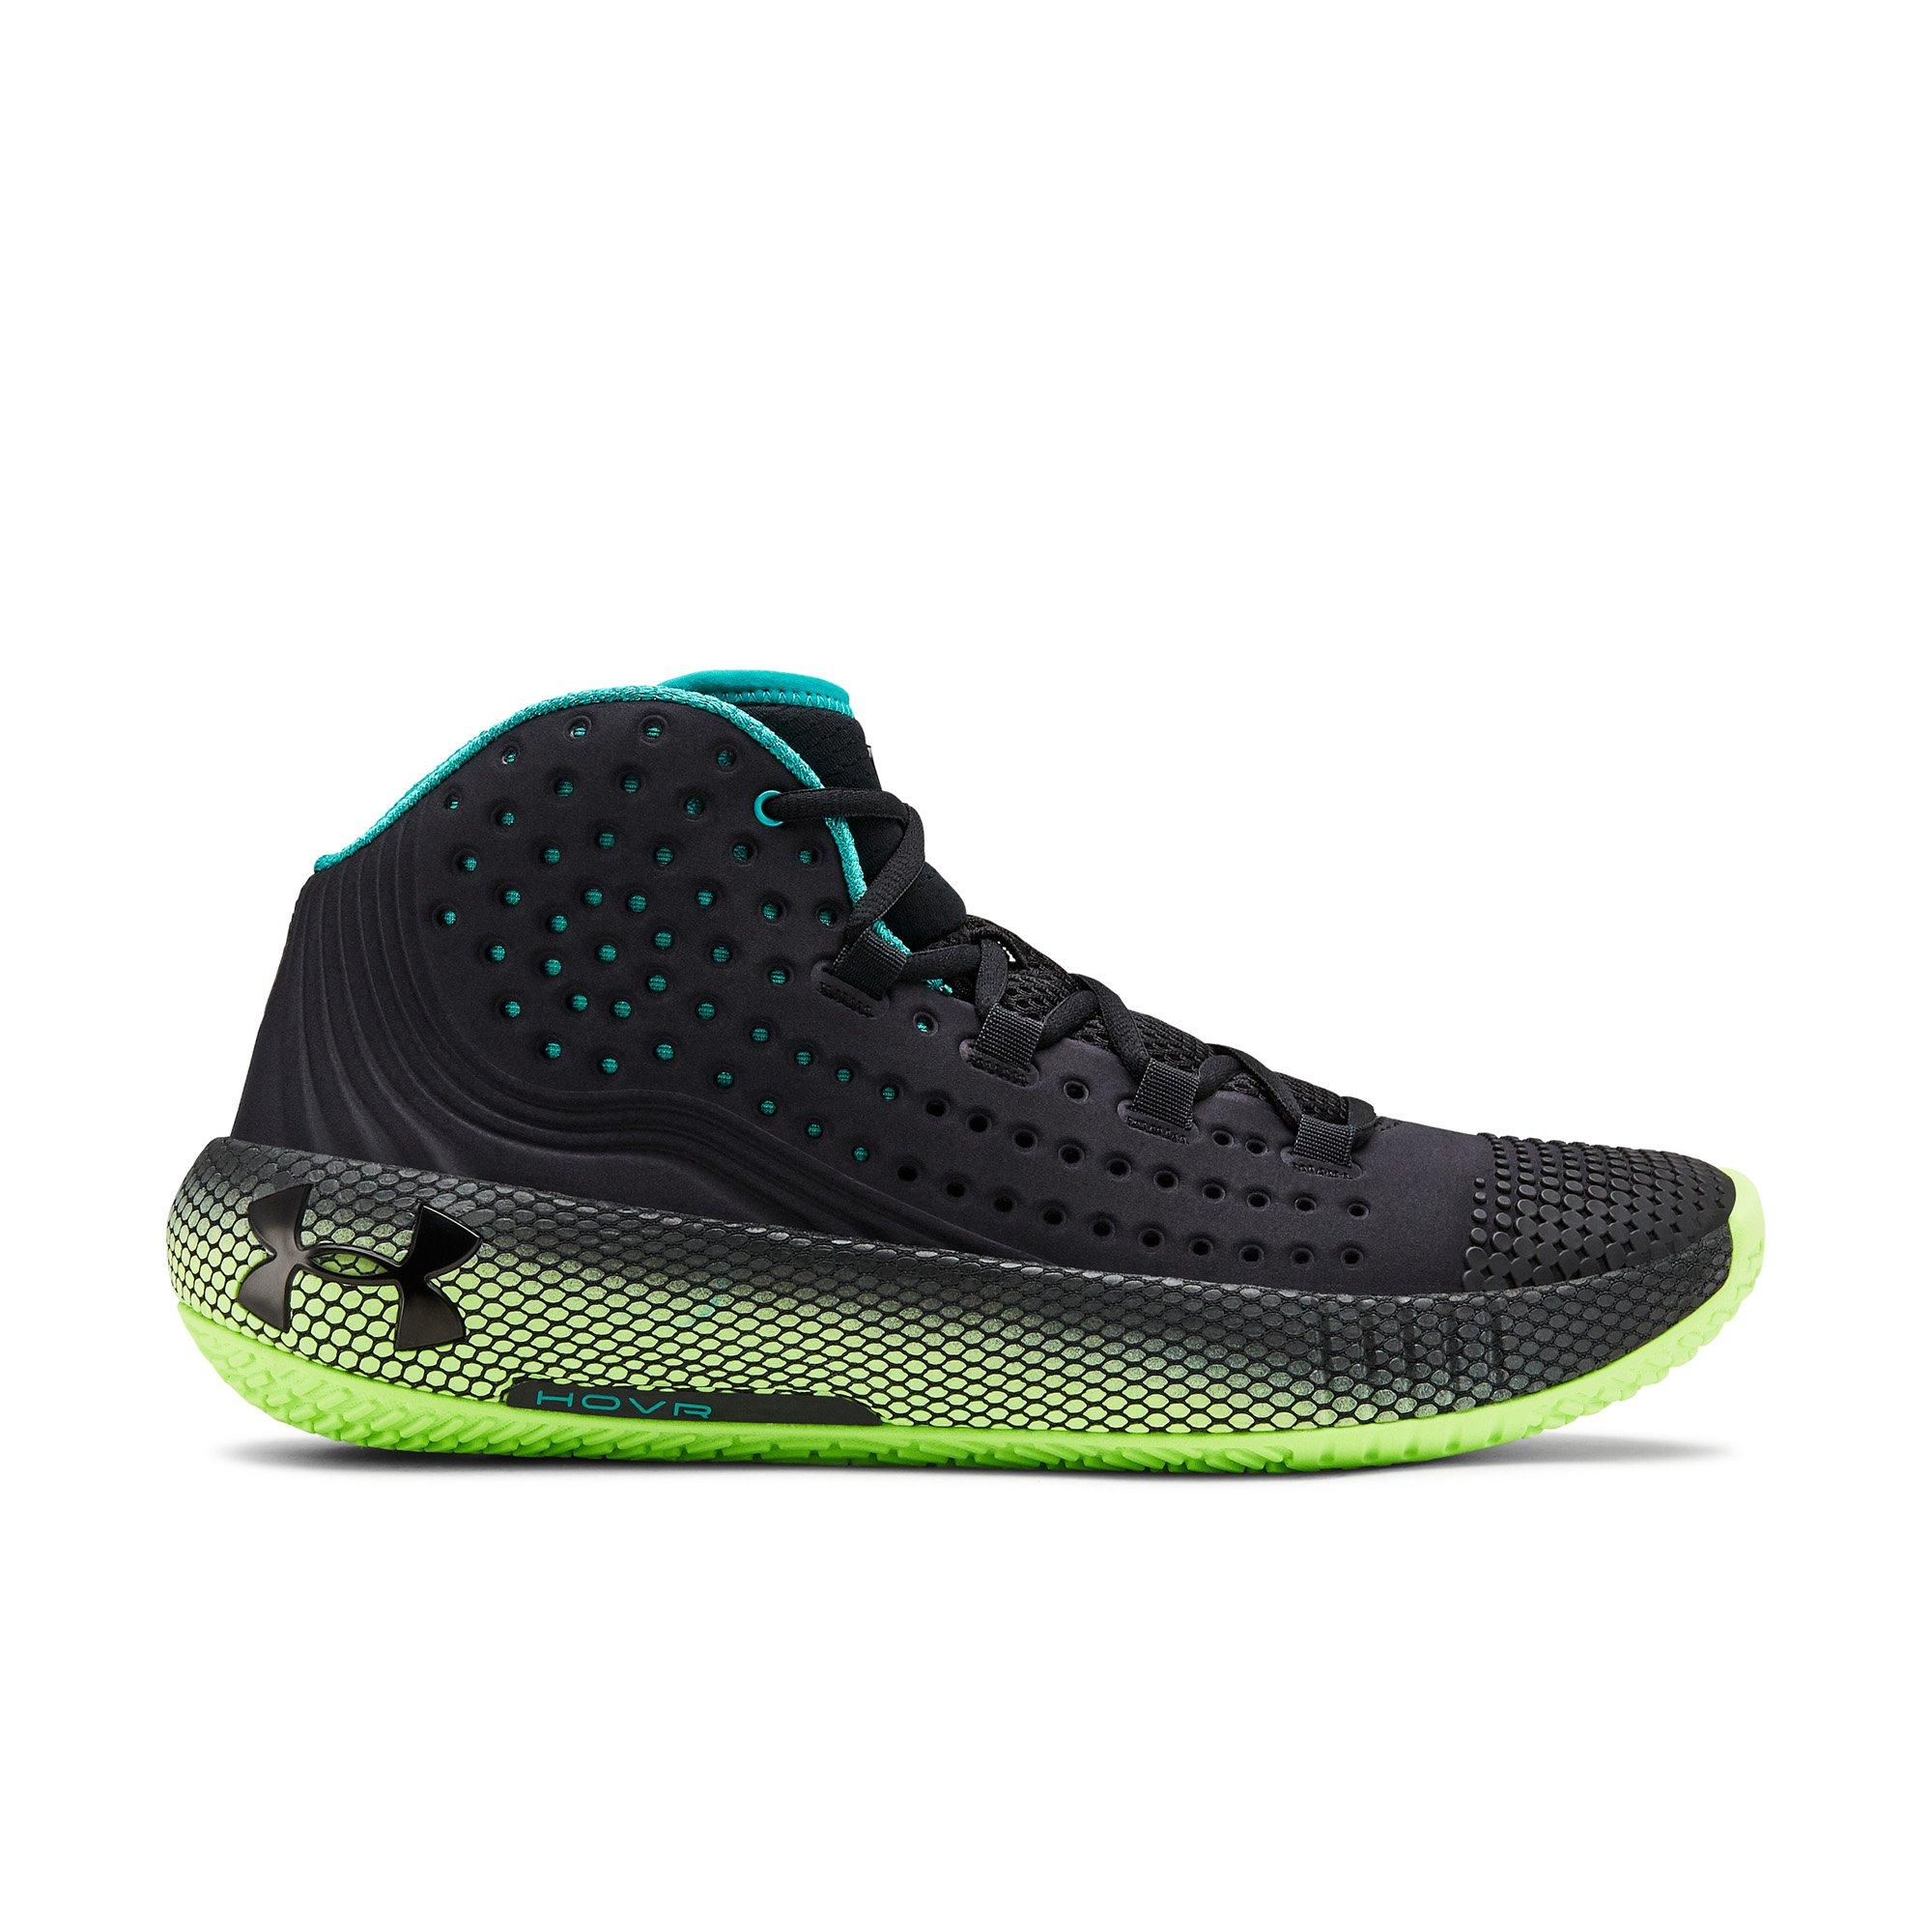 hovr under armor shoes